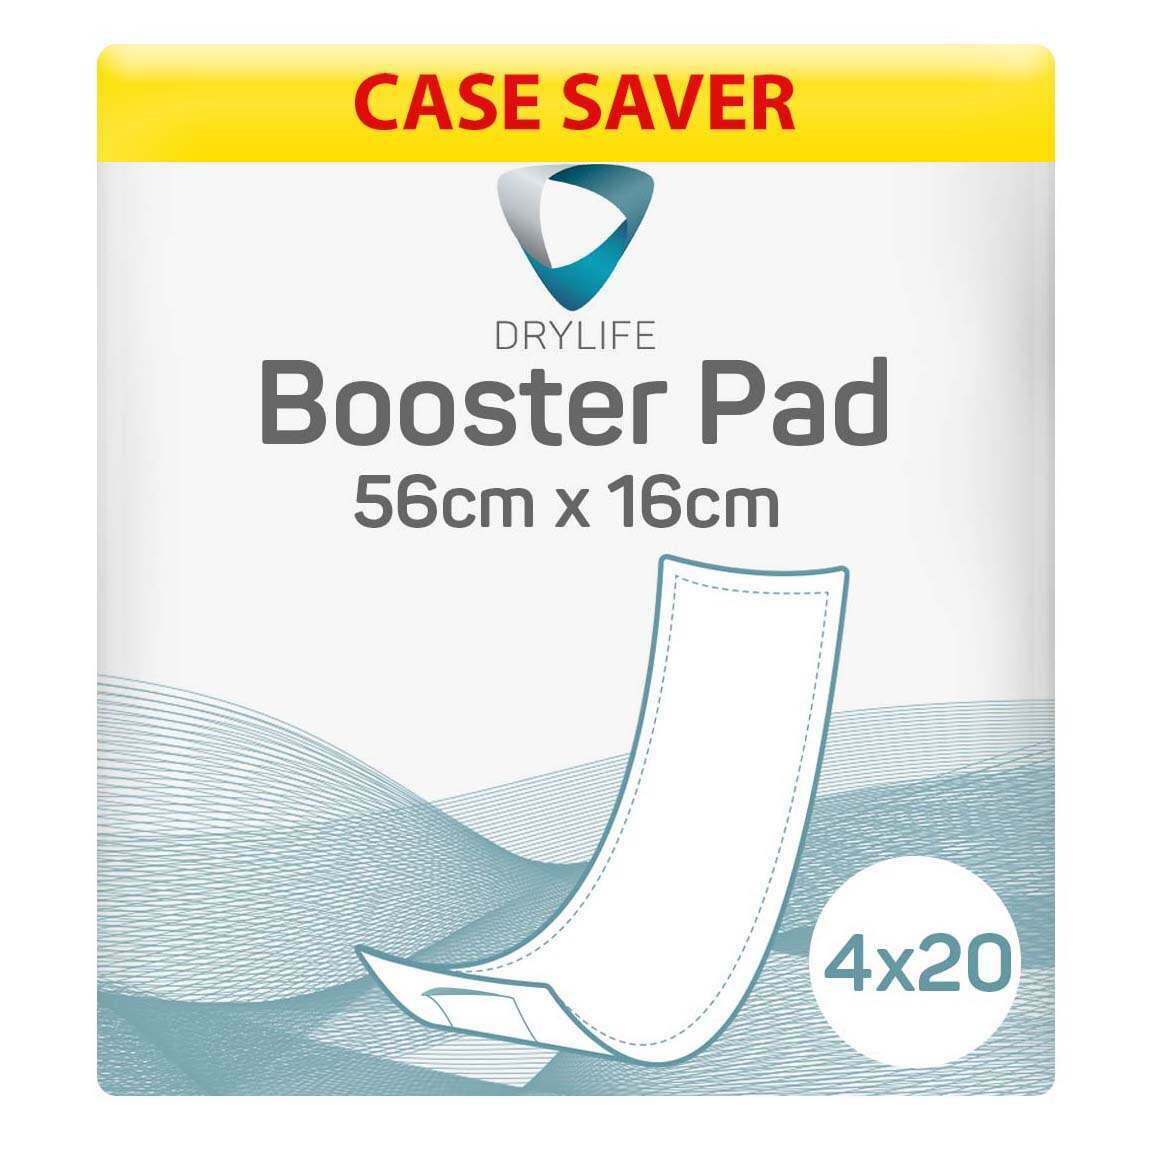 Drylife Booster Pad - Case - 4 Packs of 20 Drylife Incontinence Products